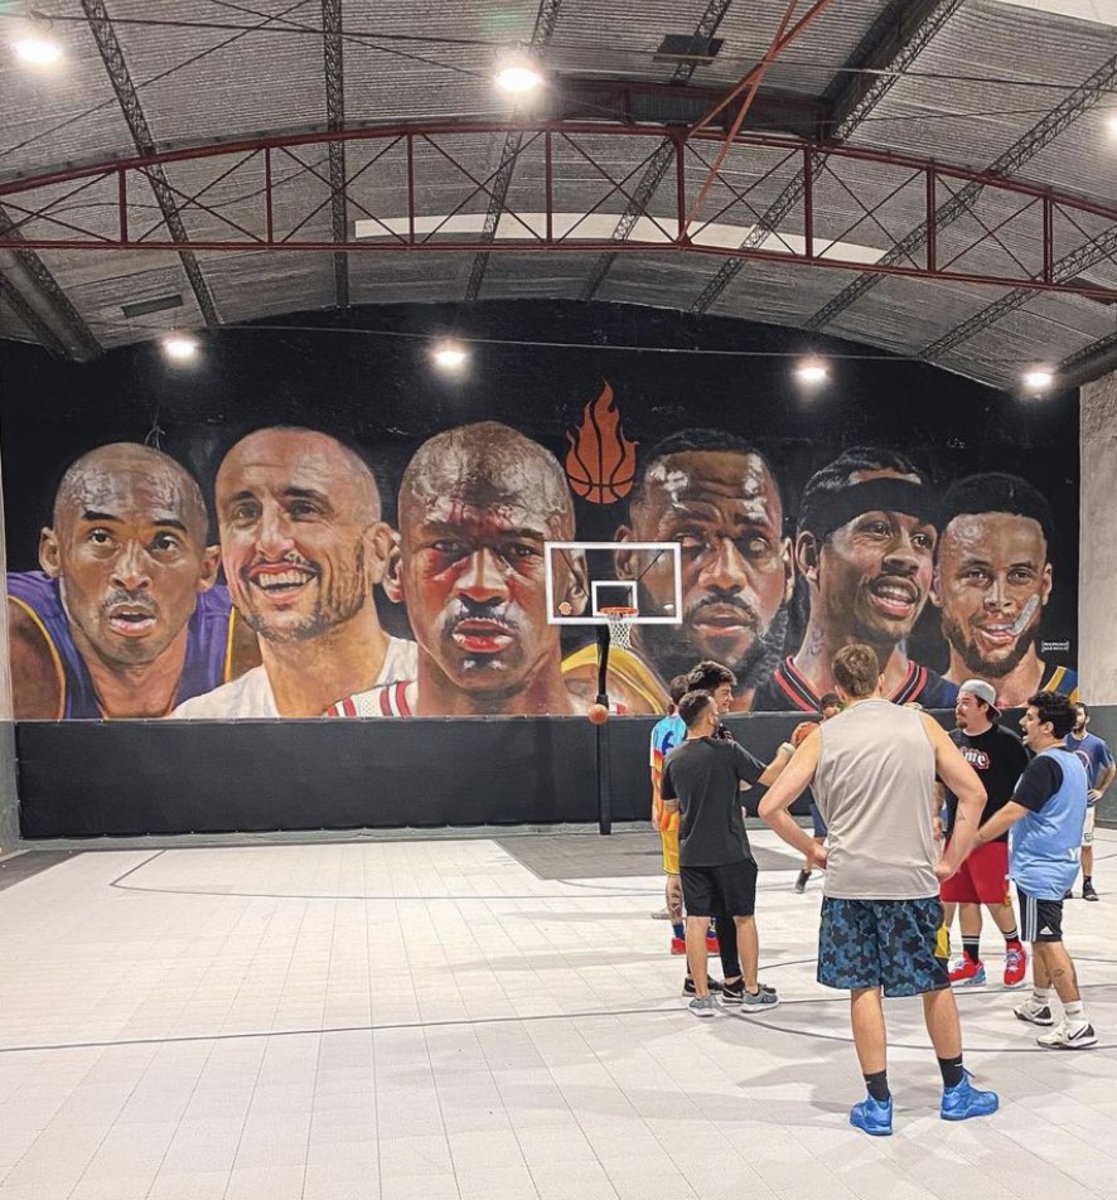 Incredible Mural Of Michael Jordan, Kobe Bryant, LeBron James, Steph Curry, Allen Iverson, And Manu Ginobili Found In Argentina